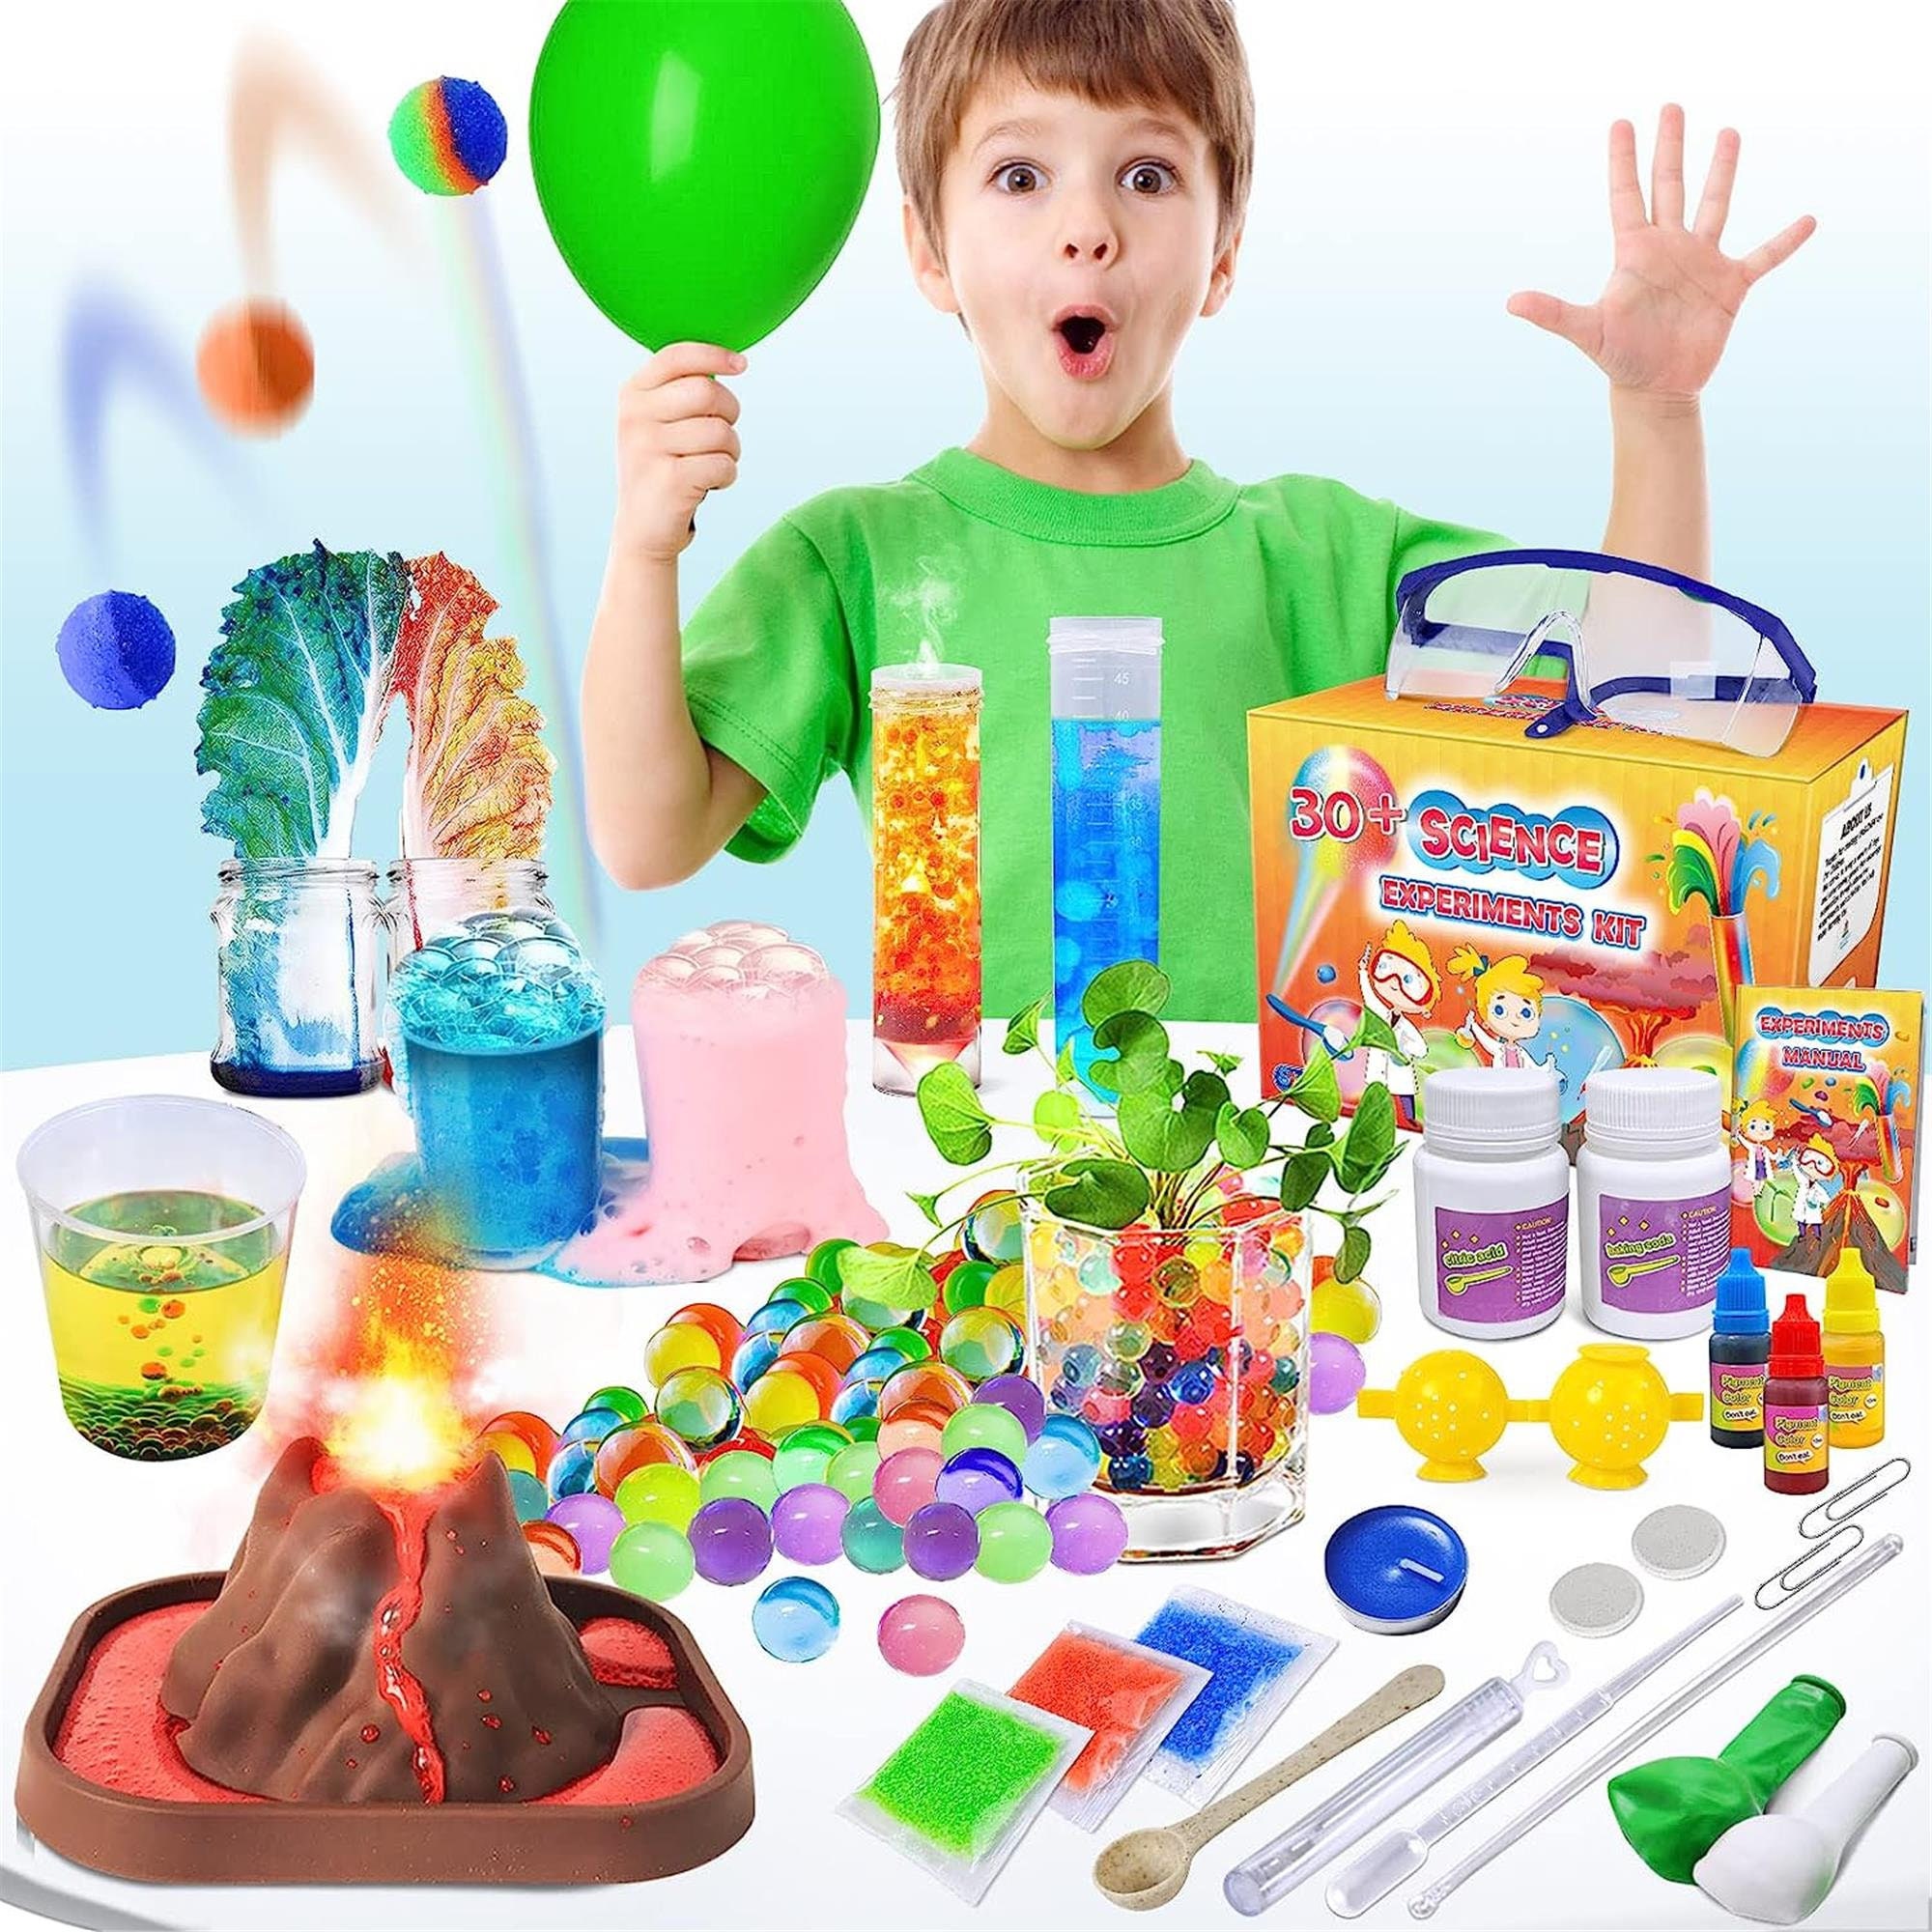 Small Inventions Science Experiments DIY Kits for Girls Boys Teens Children